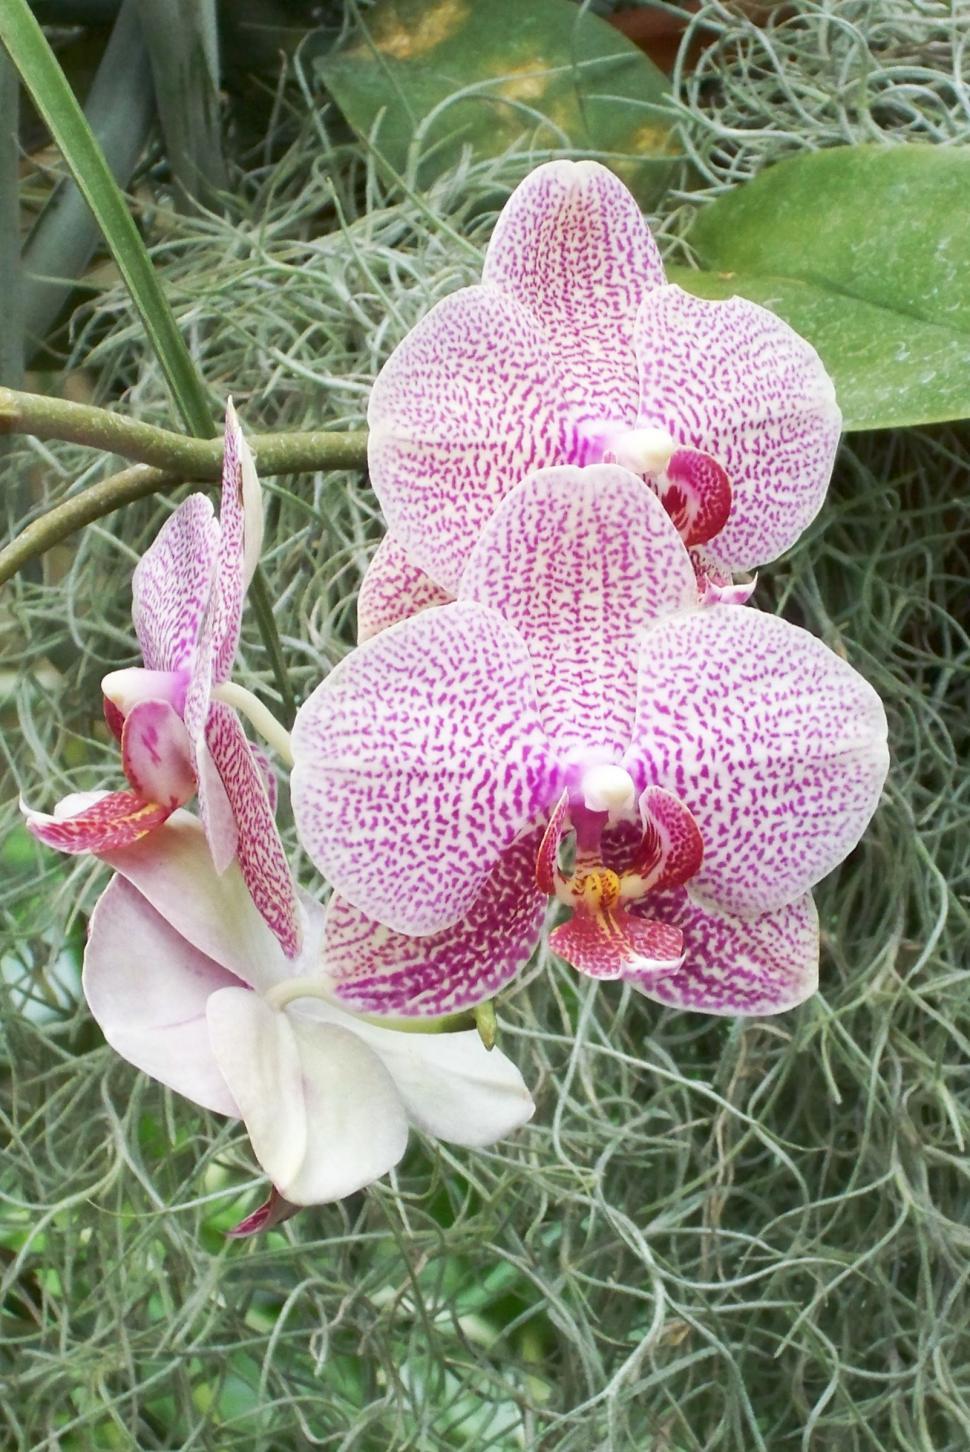 Free Image of Flowers - orchids 